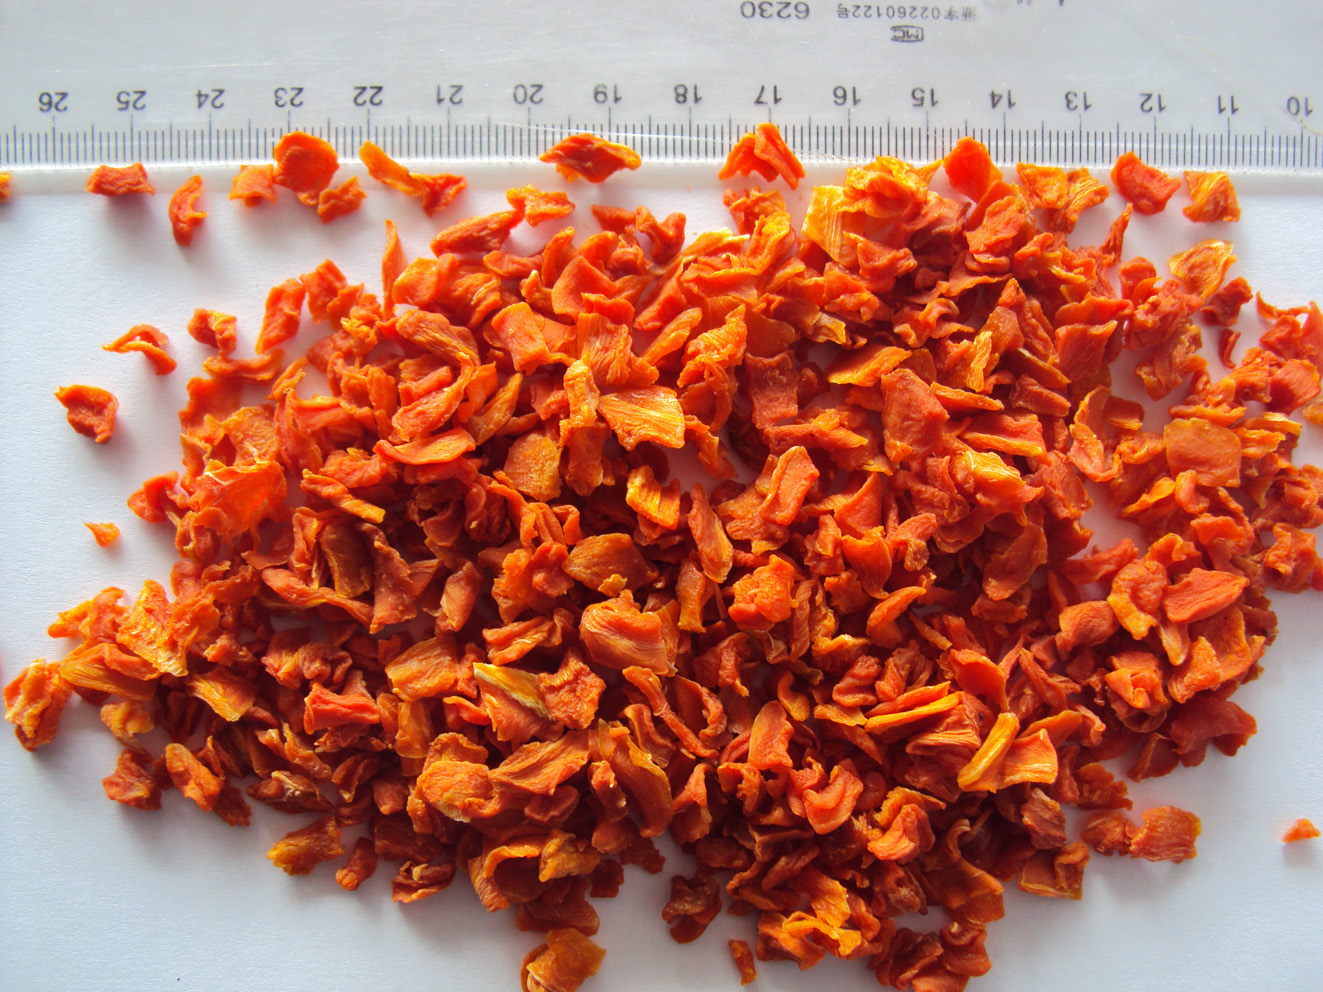 dehydrated carrot flake